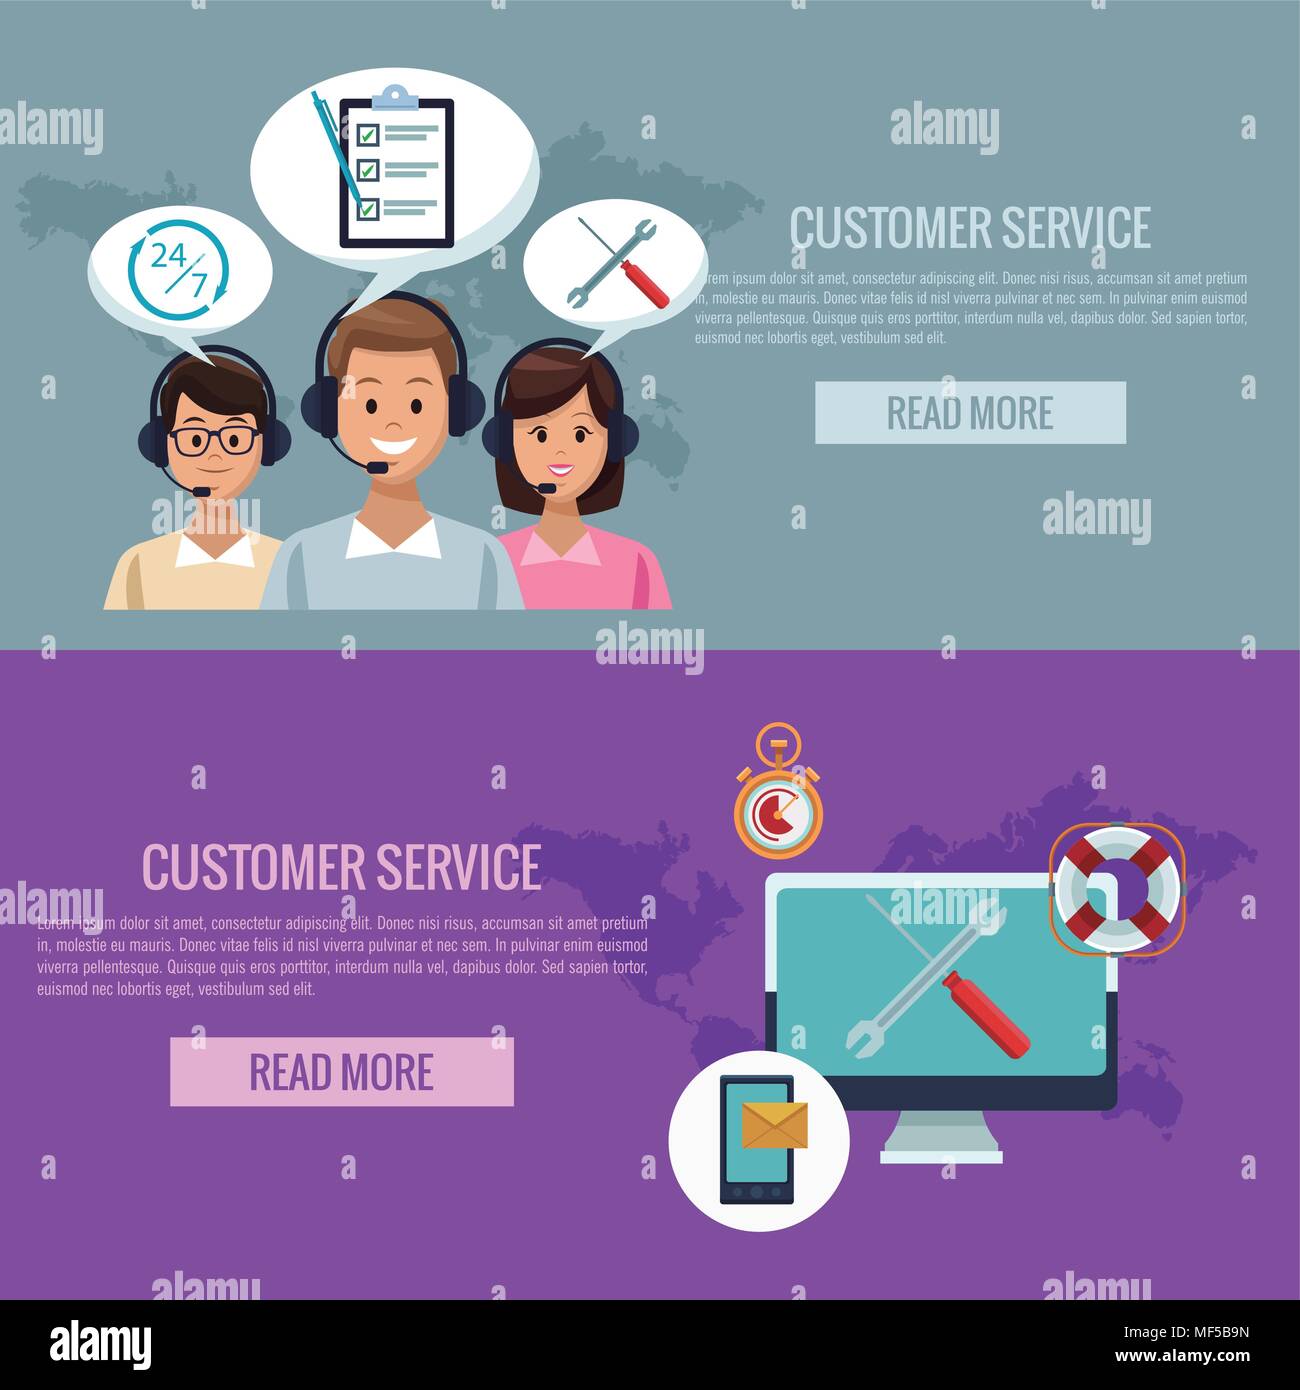 Customer service infographic Stock Vector